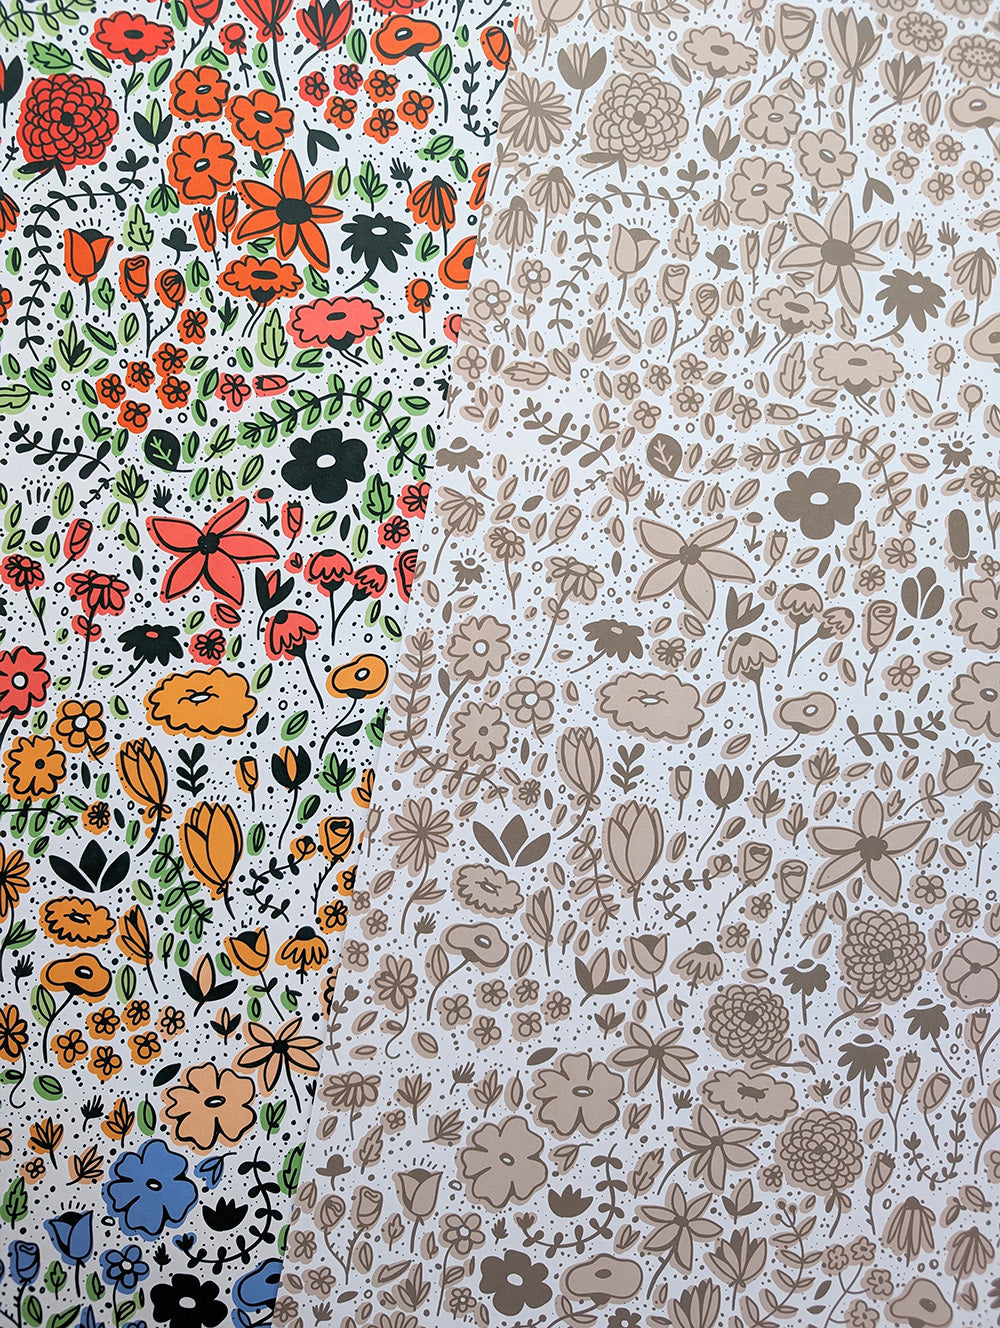 Flowerbed Print - Muted